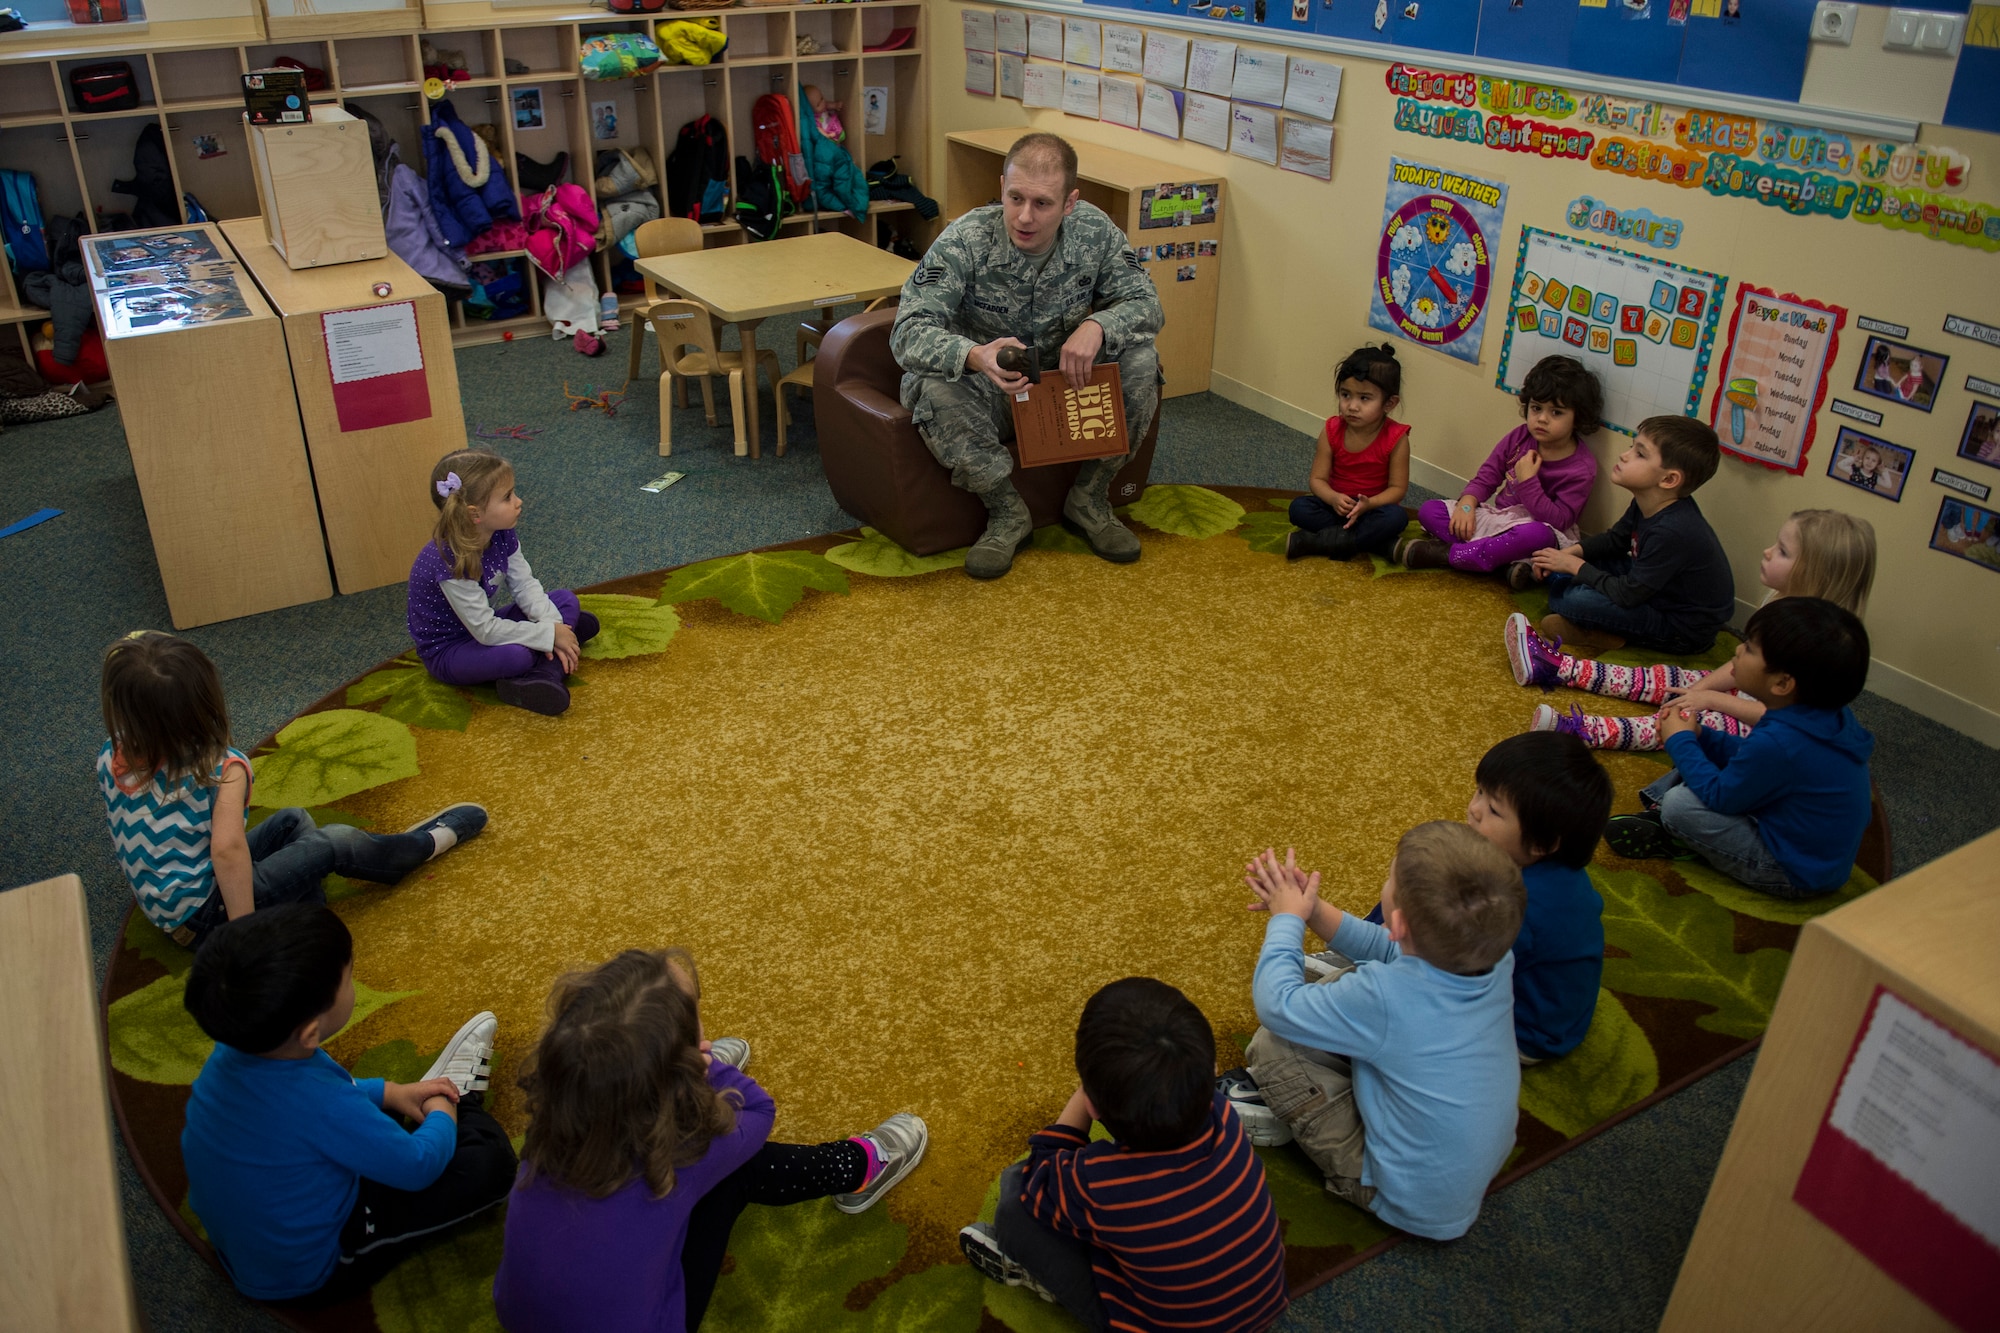 U.S. Air Force Staff Sgt. Joe W. McFadden, a 52nd Fighter Wing Public Affairs photojournalist, talks to a group of children before reading to them at the Child Development Center on Spangdahlem Air Base, Germany, Jan. 14, 2016. McFadden, Airmen Against Drunk Driving president, sponsored the third annual Dr. Martin Luther King Jr. ‘Reading Is A Civil Right’ reading drive to promote early literacy among children ahead of the holiday weekend. (U.S. Air Force photo by Airman 1st Class Luke Kitterman/Released) 